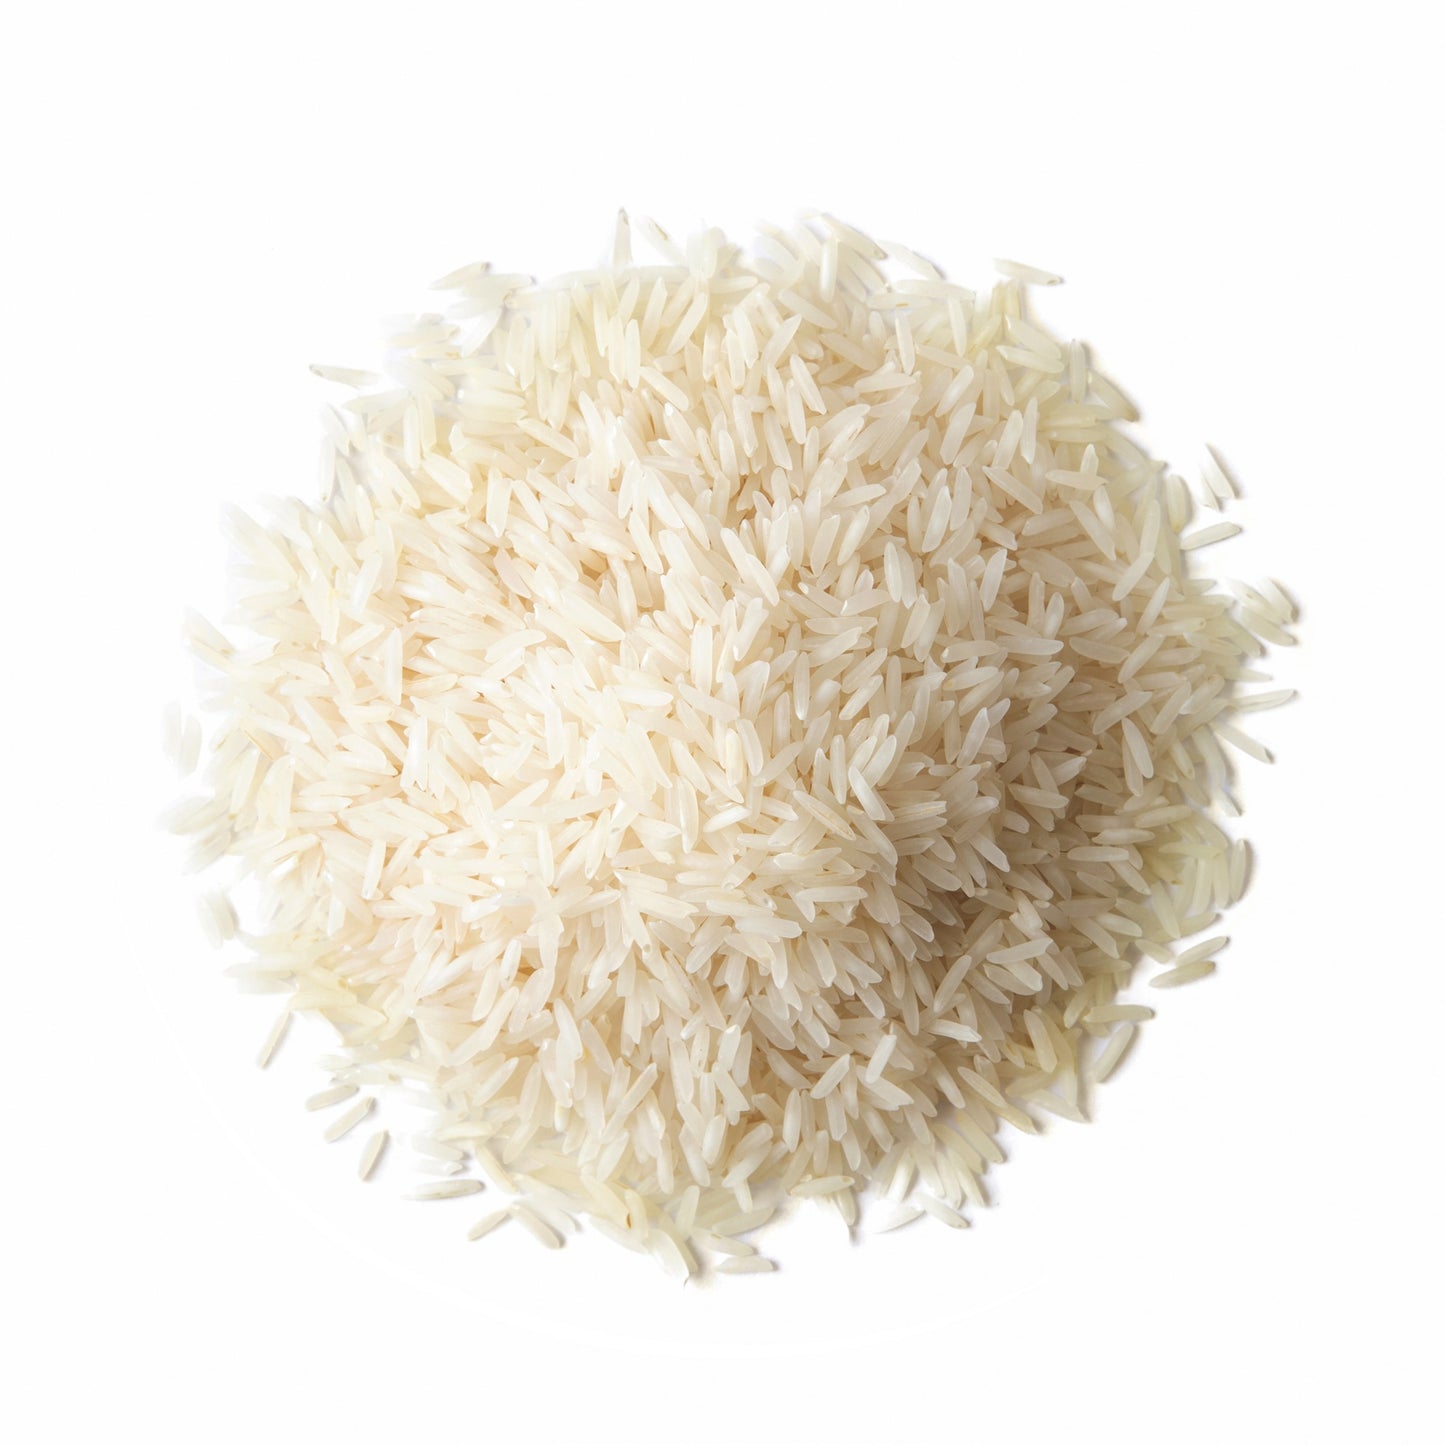 Jasmine White Rice — Long-Grain, Raw, Vegan, and Kosher, Bulk. Fluffy Texture. Good Source of Protein and Folate. Perfect Side Dish. Great for Stir-Fried Vegetables, Stews, and Thai Curries